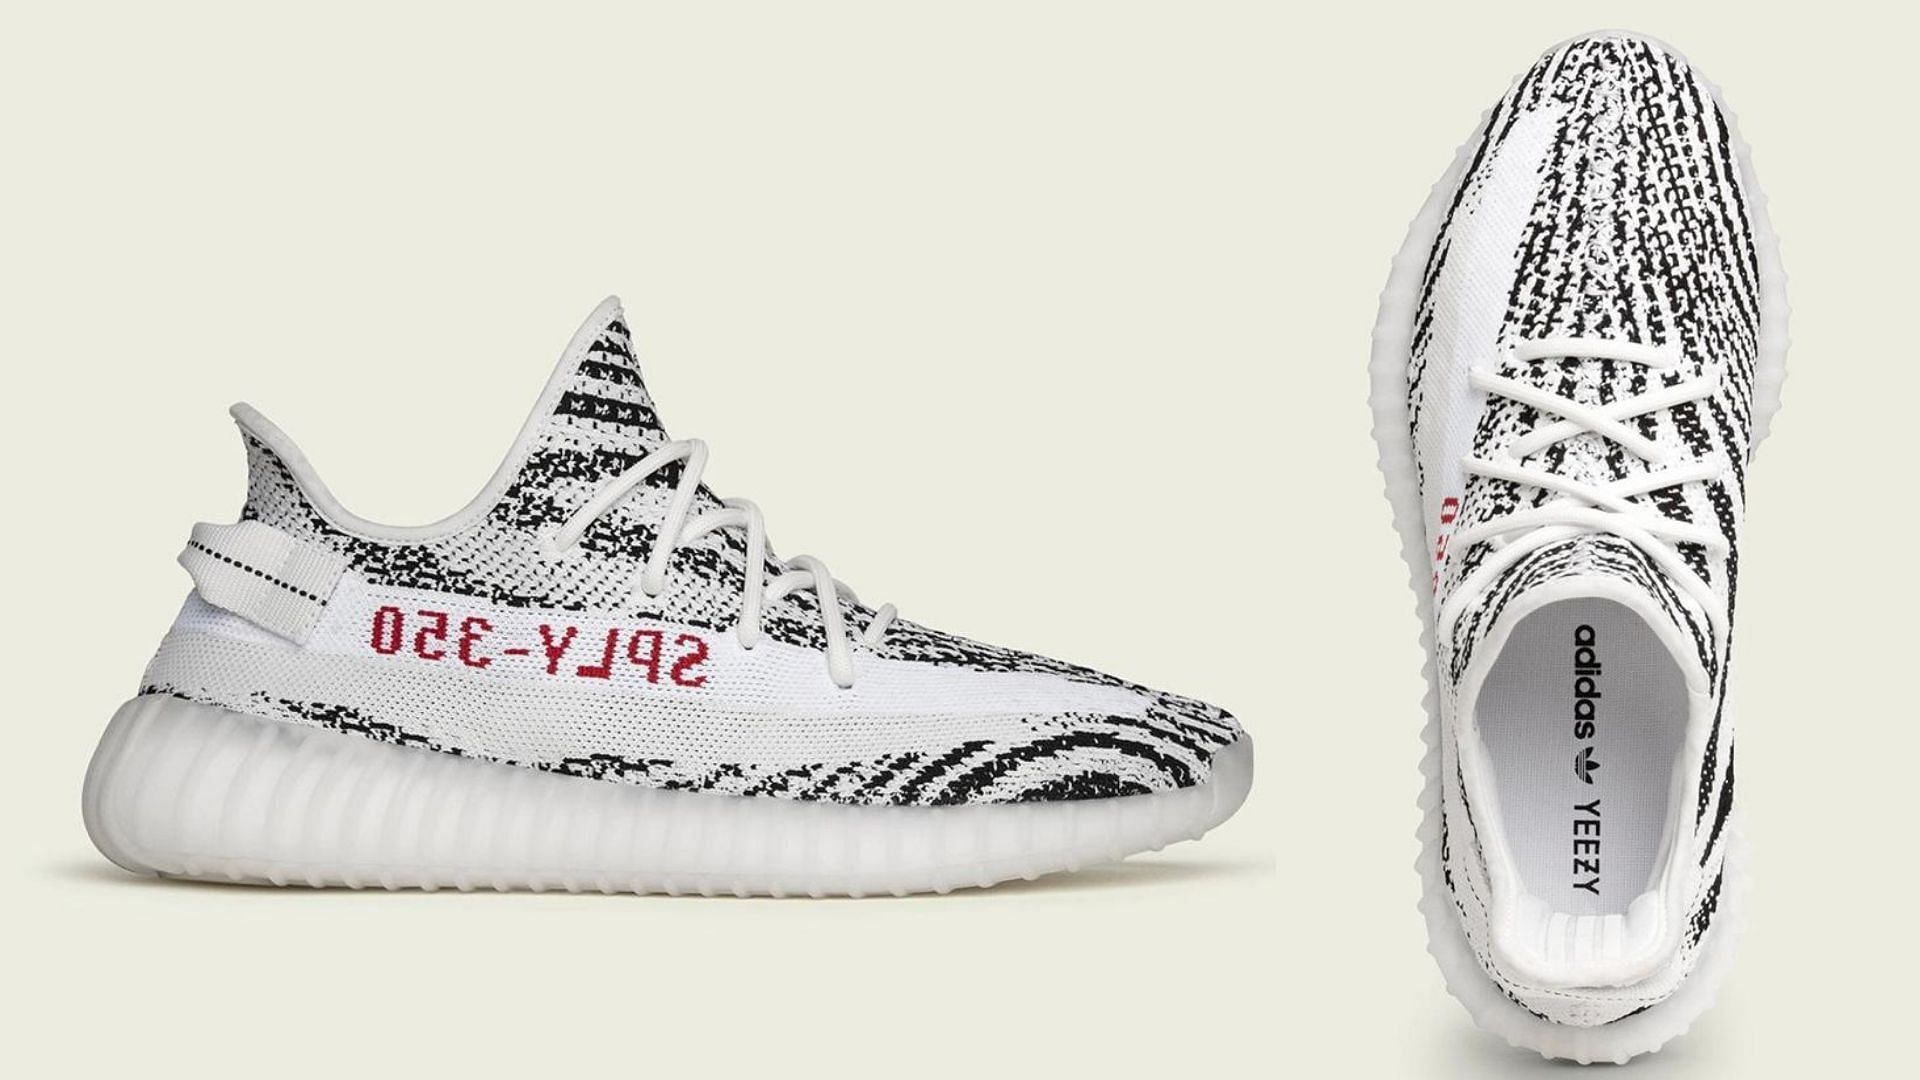 A closer look at the Zebra colorway (Image via Adidas Yeezy)